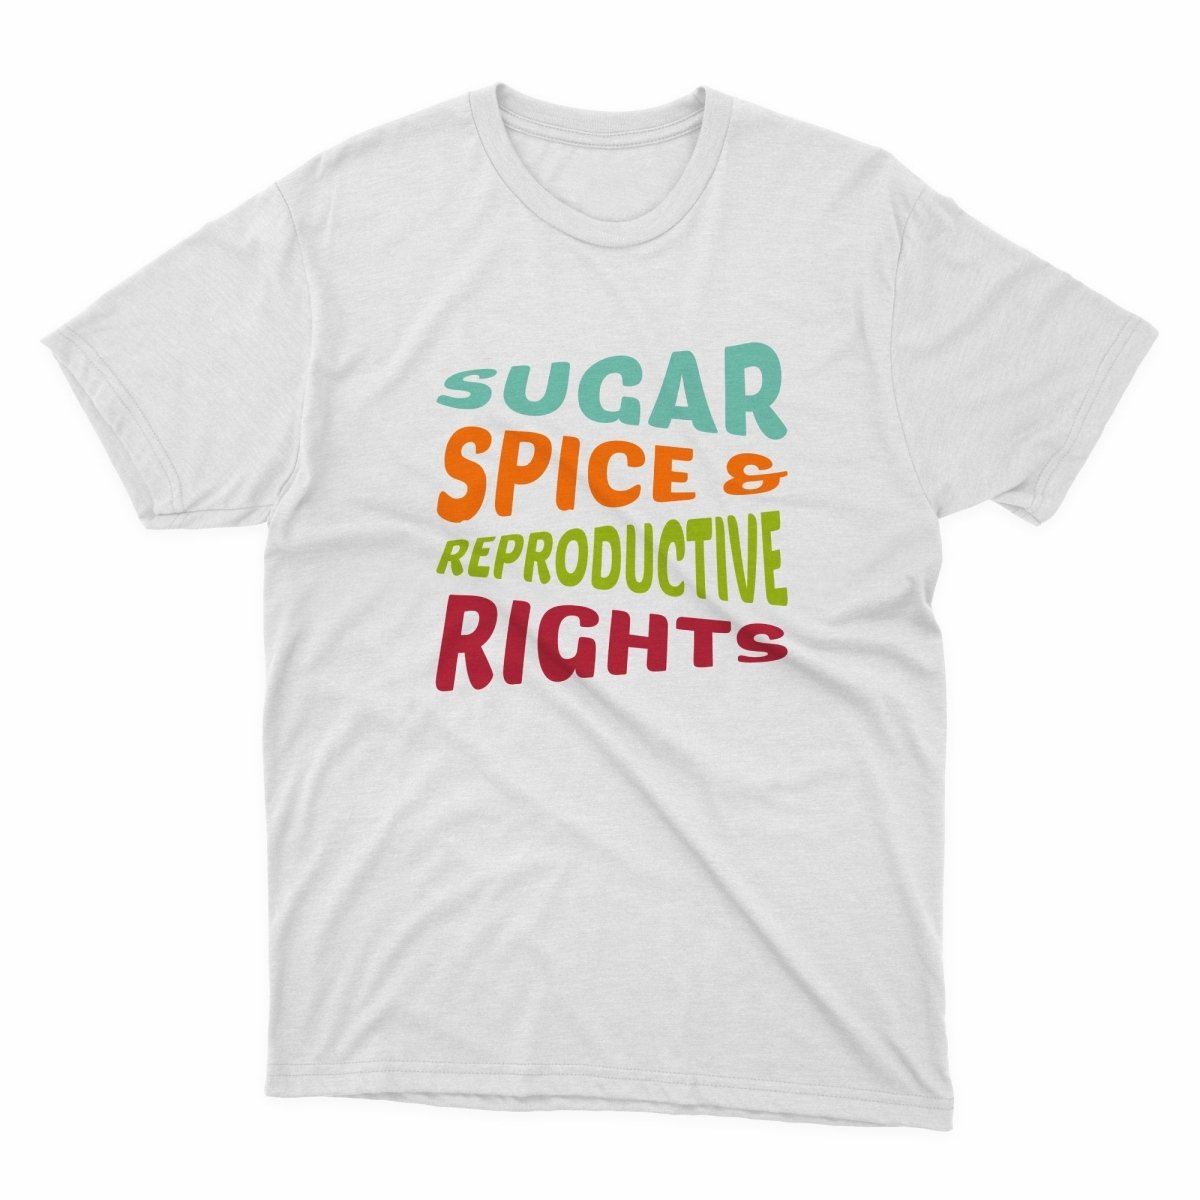 Sugar Spice Reproductive Rights Shirt - stickerbullSugar Spice Reproductive Rights ShirtShirtsPrintifystickerbull21785018526407637456WhiteSa white t - shirt with the words sugar spice and reproductive rights